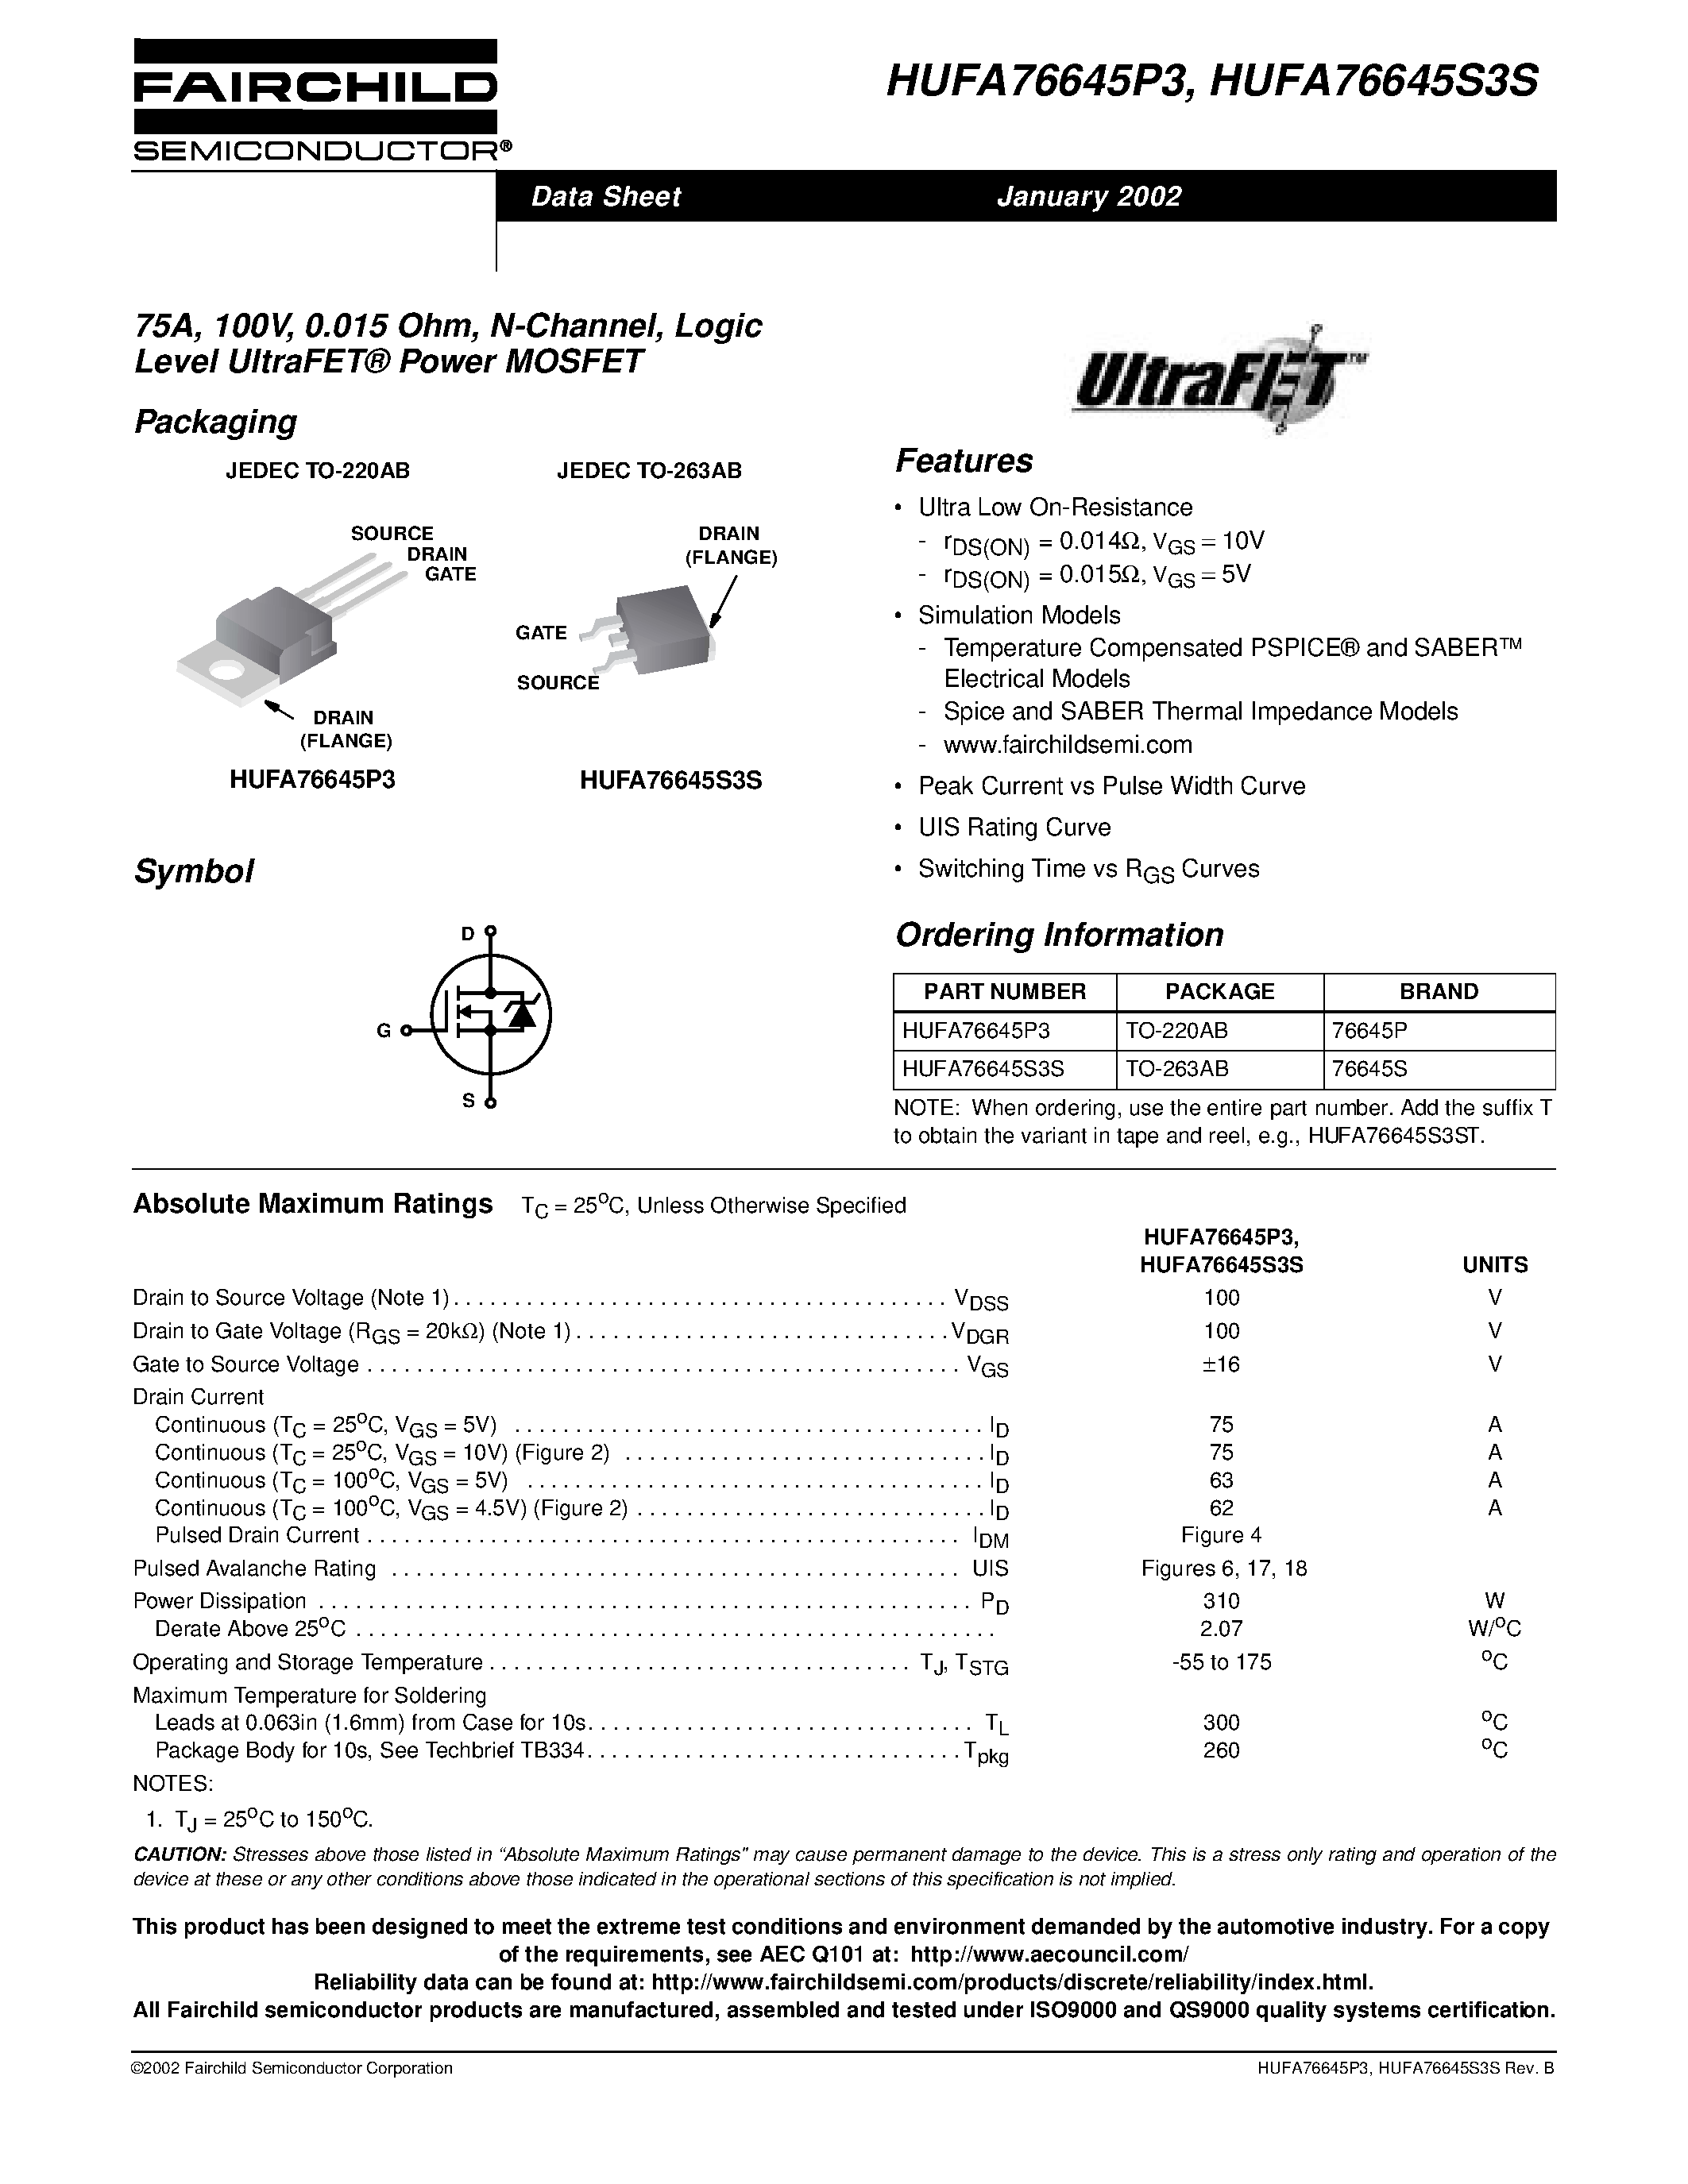 Datasheet HUFA76645P3 - 75A/ 100V/ 0.015 Ohm/ N-Channel/ Logic Level UltraFET Power MOSFET page 1